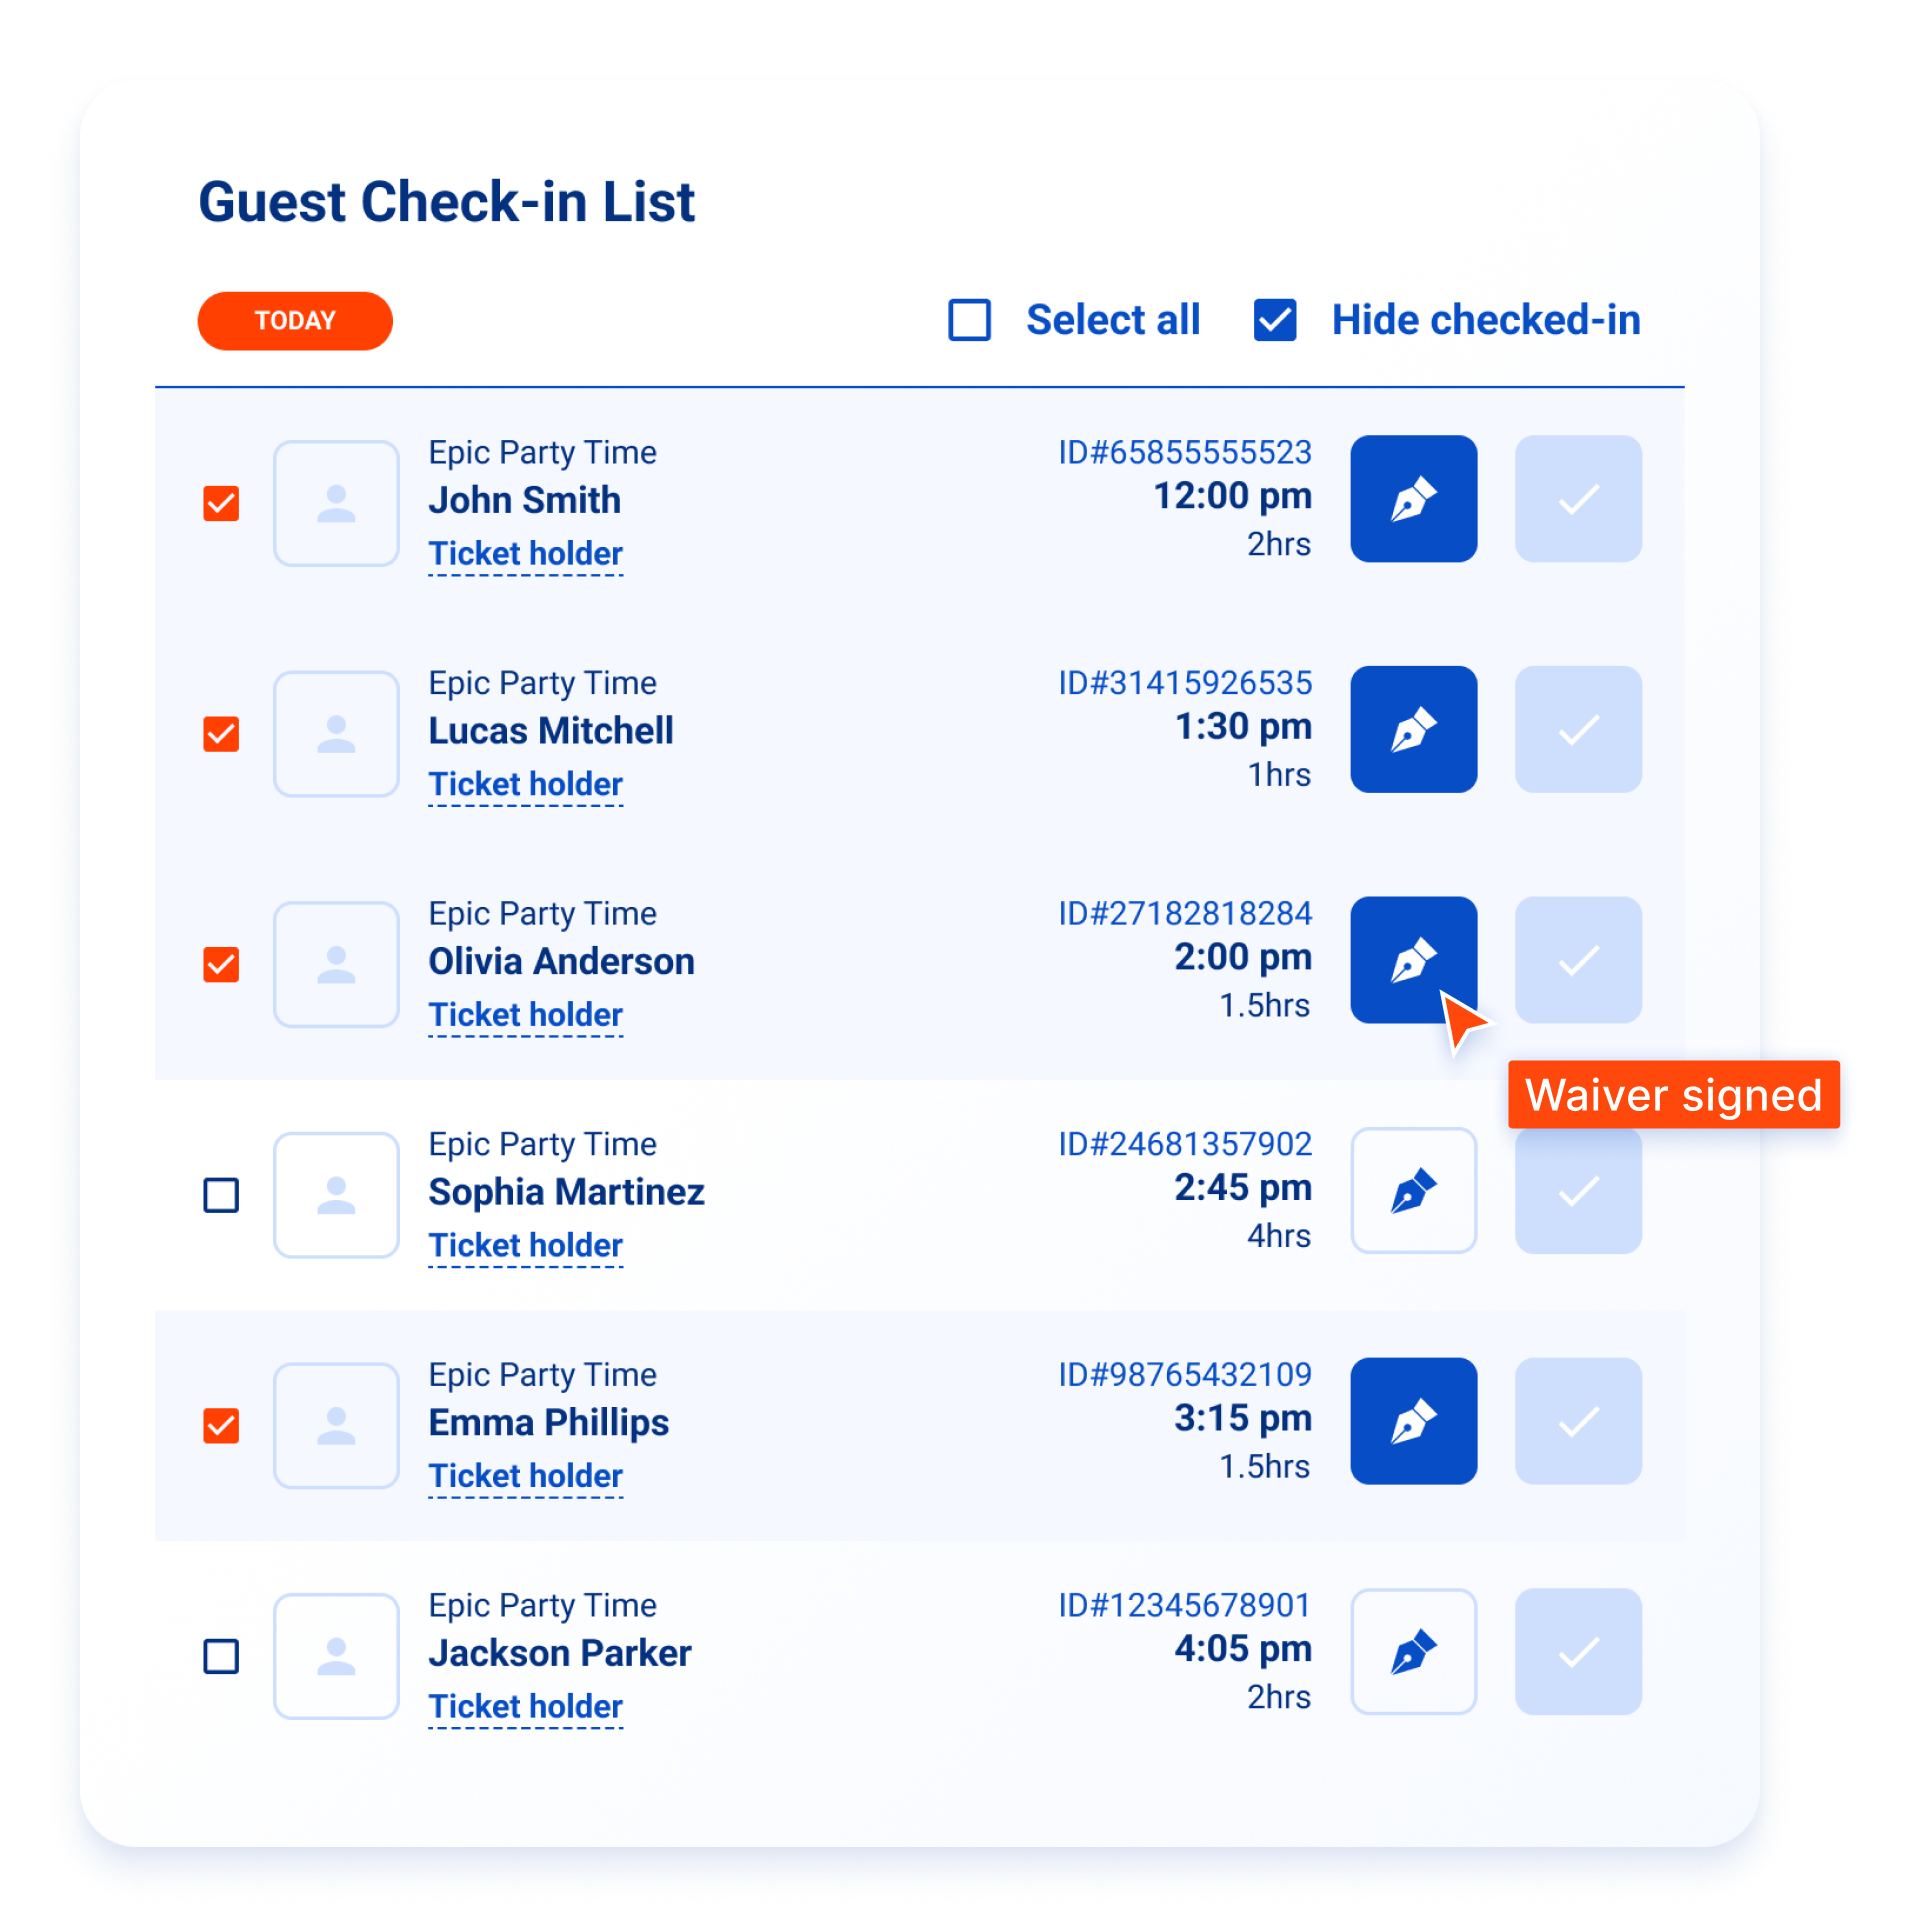 Guest check-in list in POS